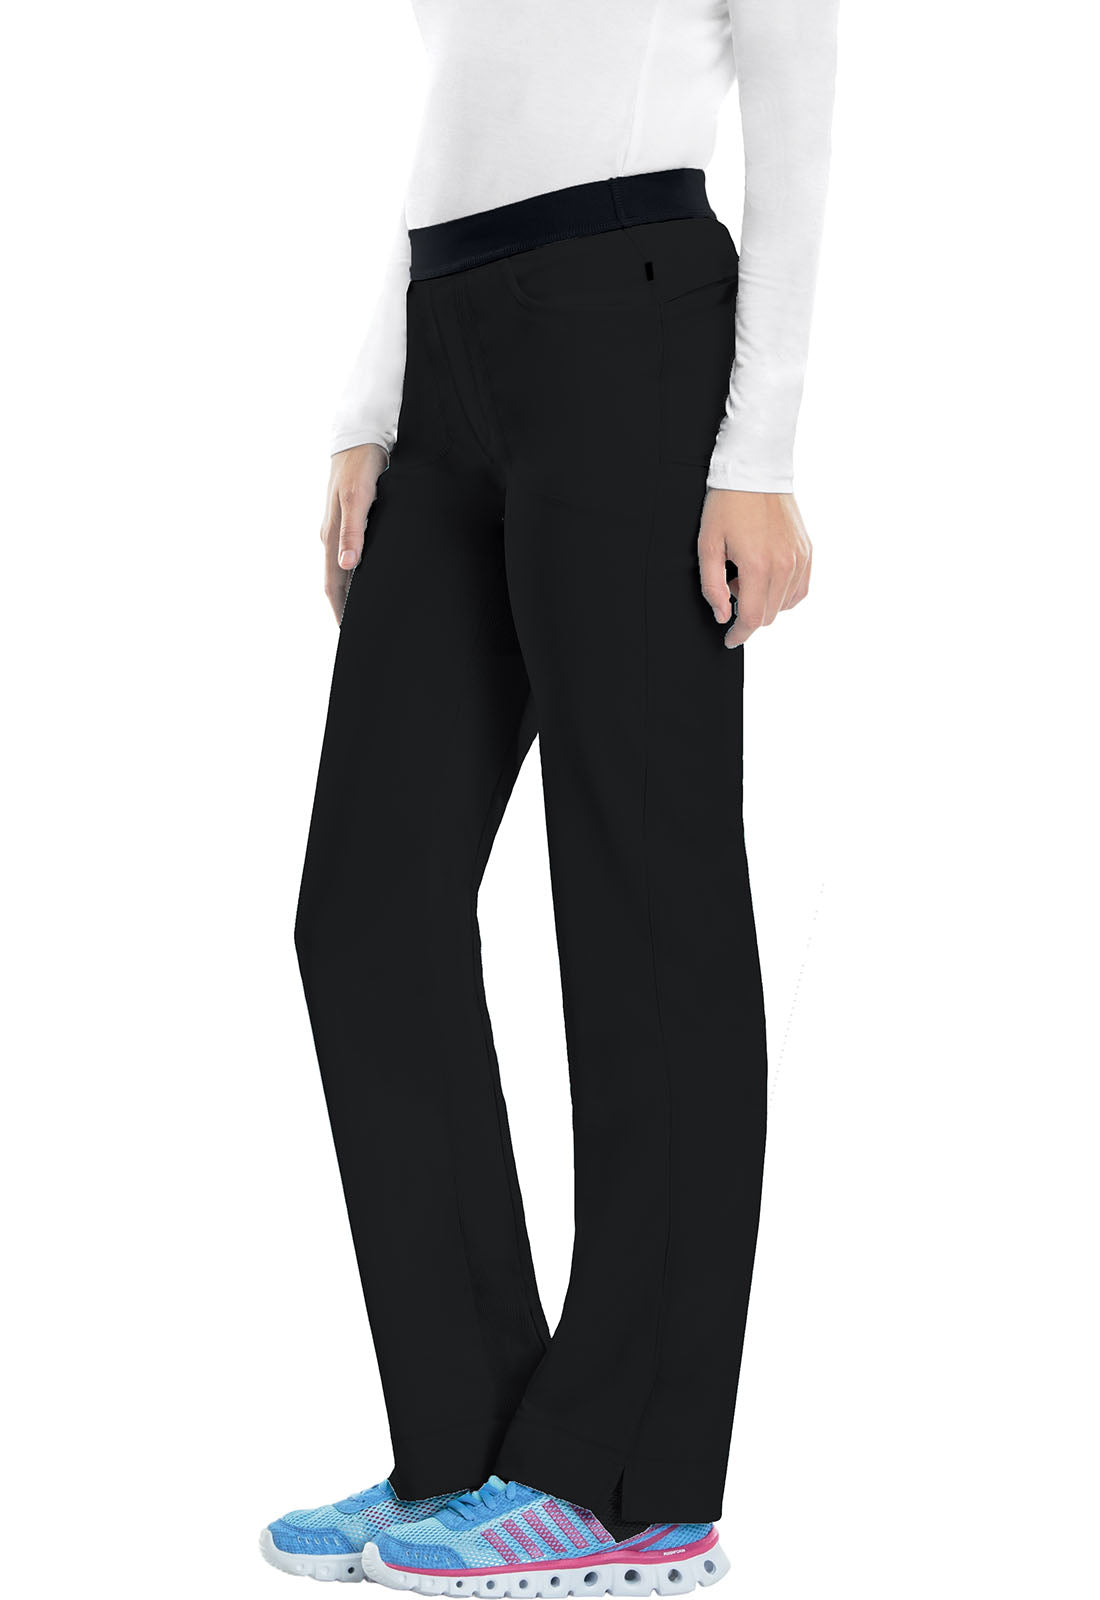 Infinity - Women's Slim Pull-On Solid Pant [2]